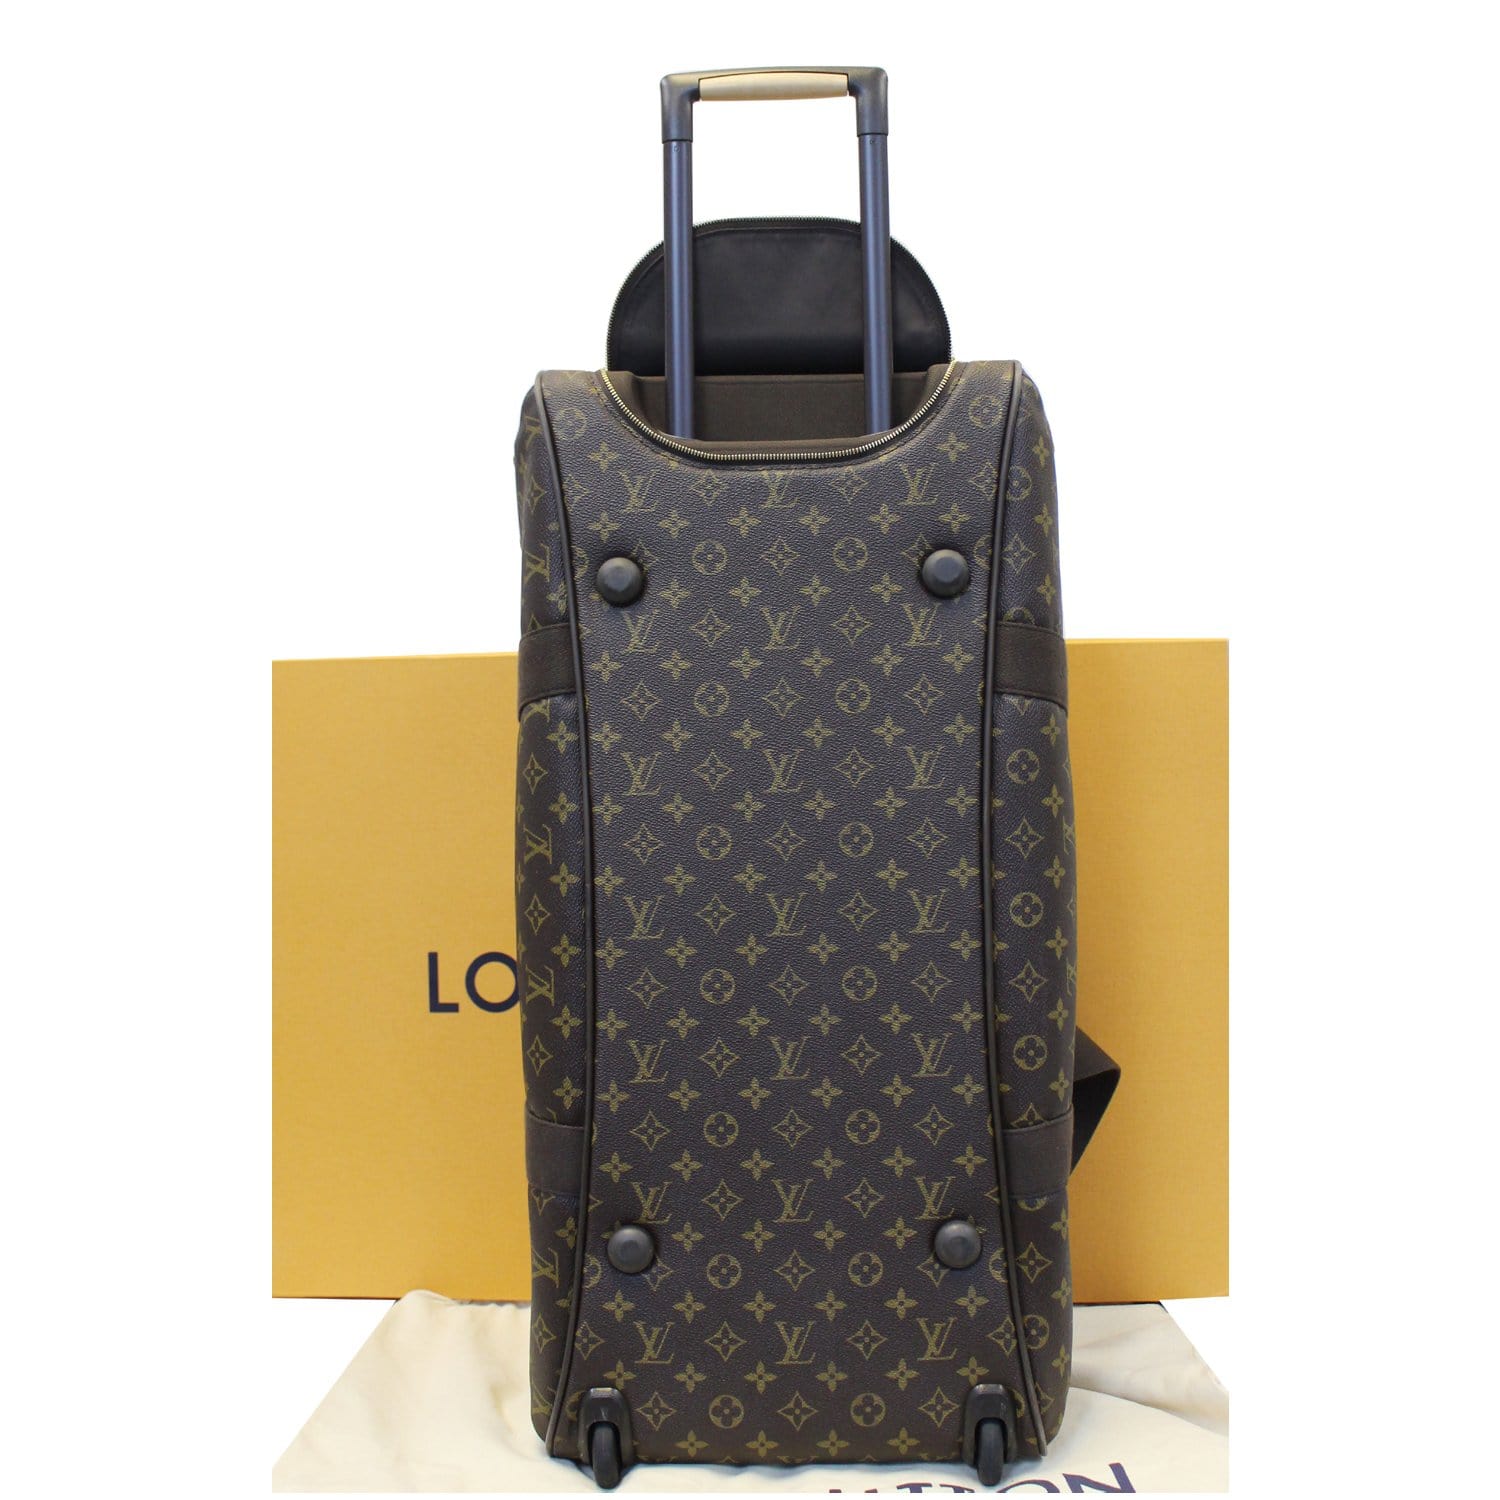 LOUIS VUITTON SHOULDER BAG DUFFEL LV TRAVEL CARRY ON LUGGAGE